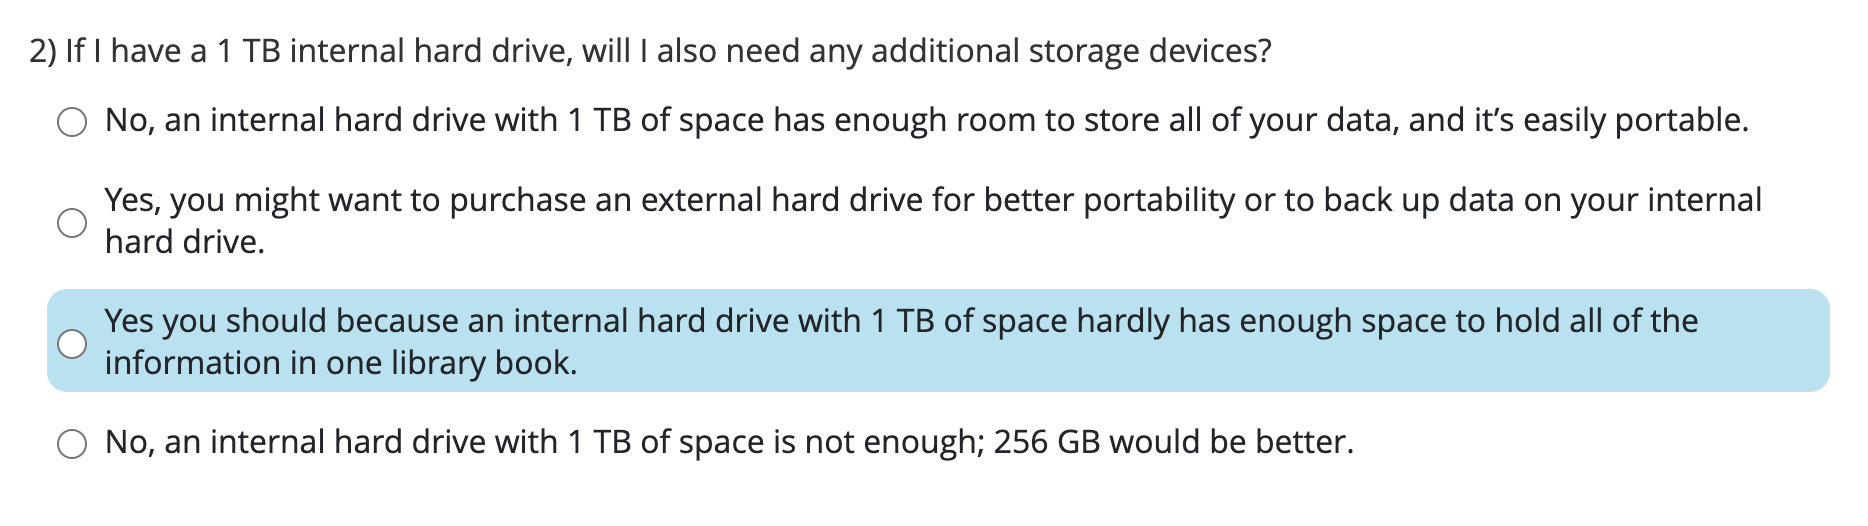 2) If I have a 1 TB internal hard drive, will I also need any additional storage devices? No, an internal